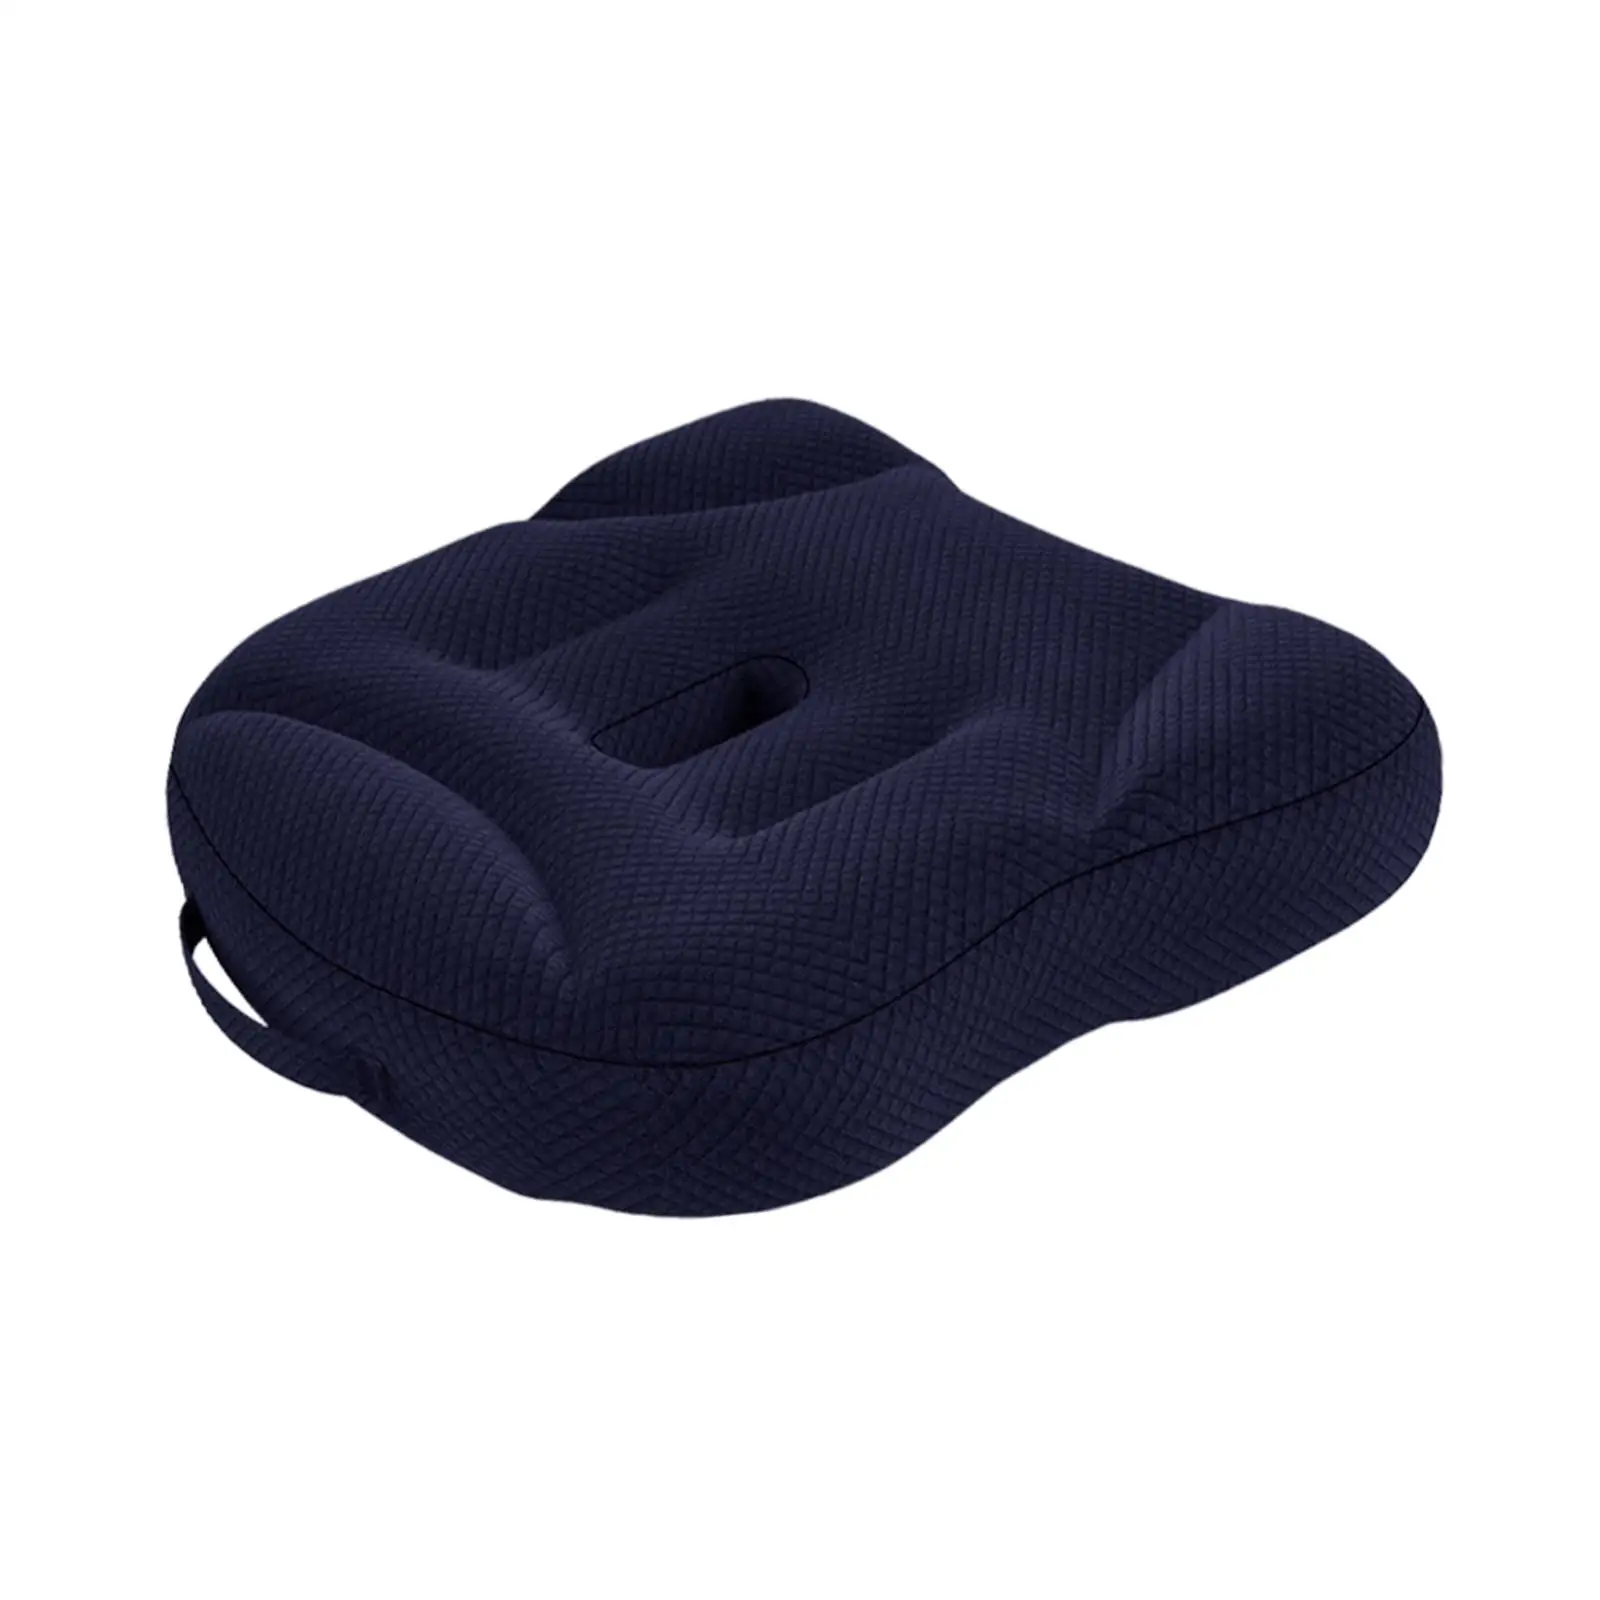 Seat Cushion Pillow Non Slip Washable Soft Chair Cushion Seat Pad Car Seat Cushions for Traveling Driving home Office